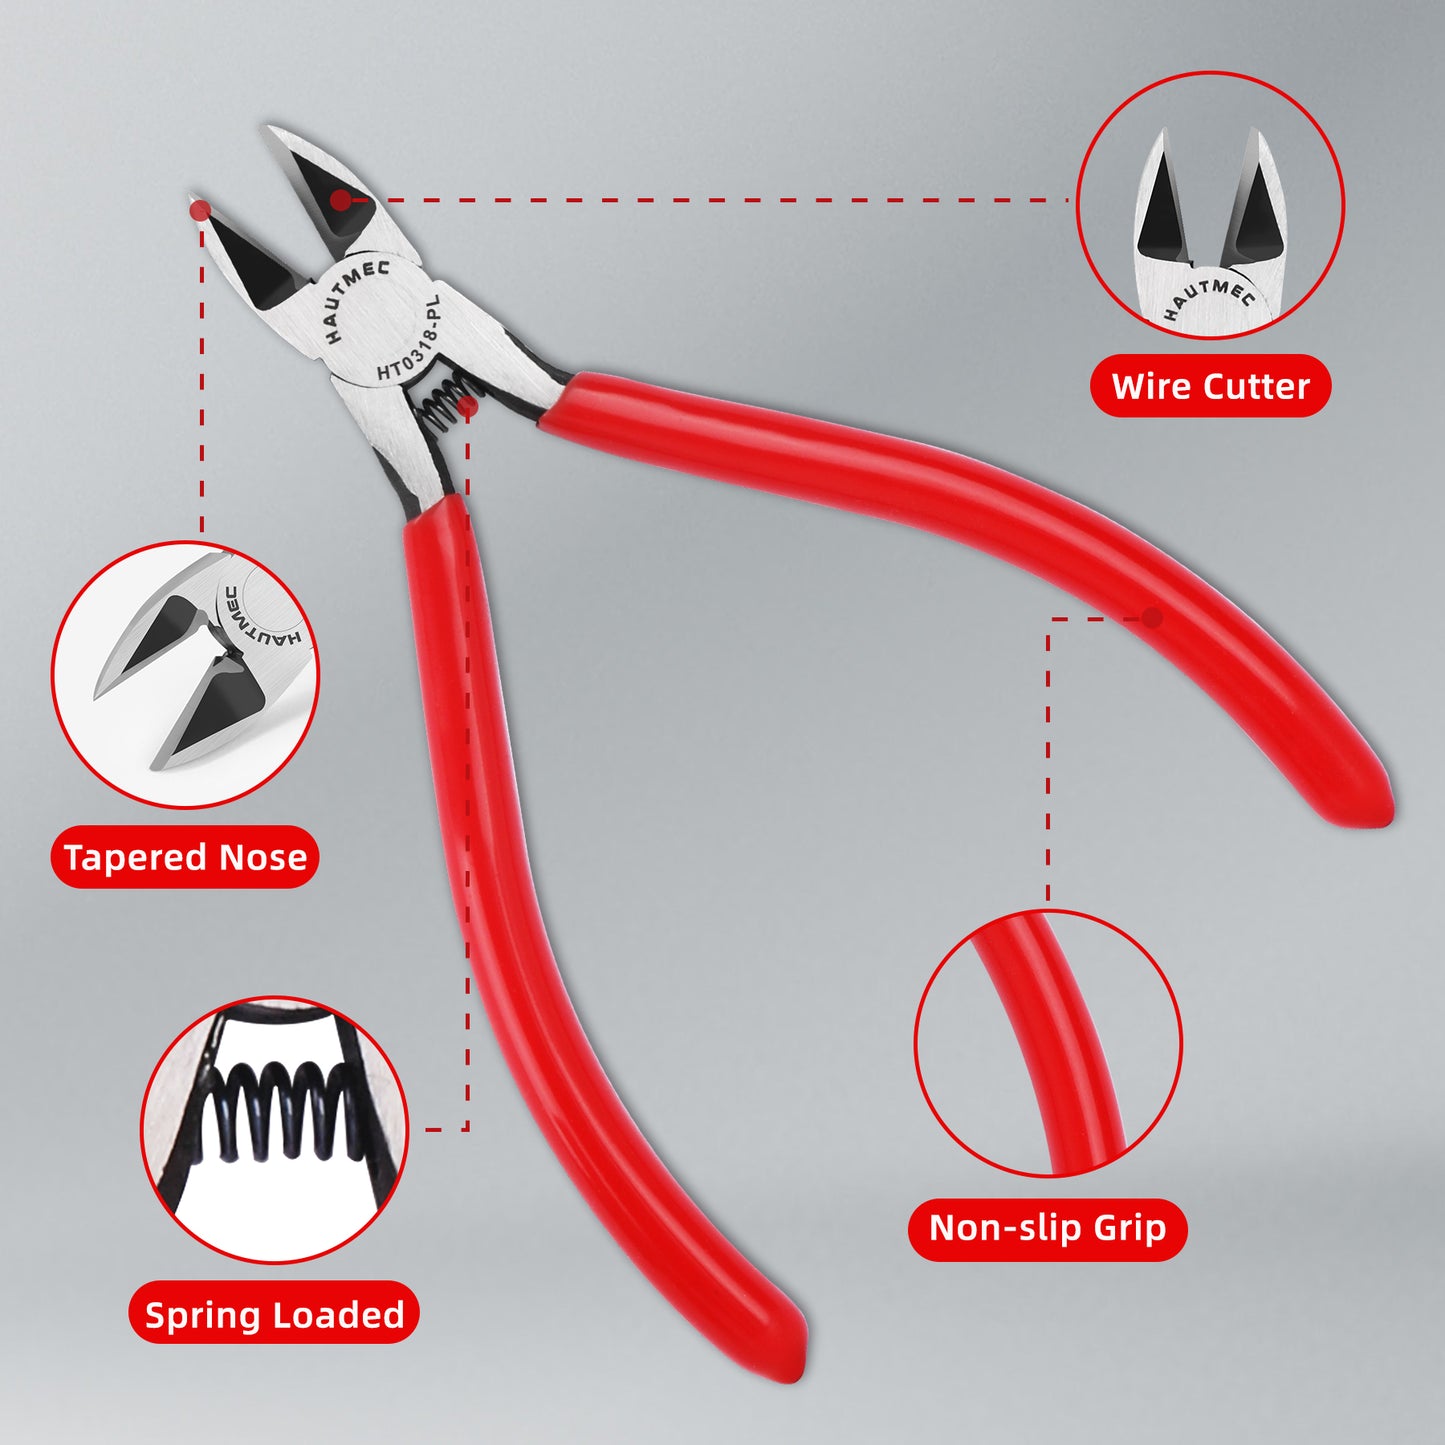 HAUTMEC 6" Flush Cut Pliers Ultra Sharp Wire Cutters 10PCS with Spring Loaded and Non-slip Grip, Ideal Wire Snips for Plastic, Soft Wire, Toy Model Kits, Jewelry Marking, Zip Ties, HT0318-10PC